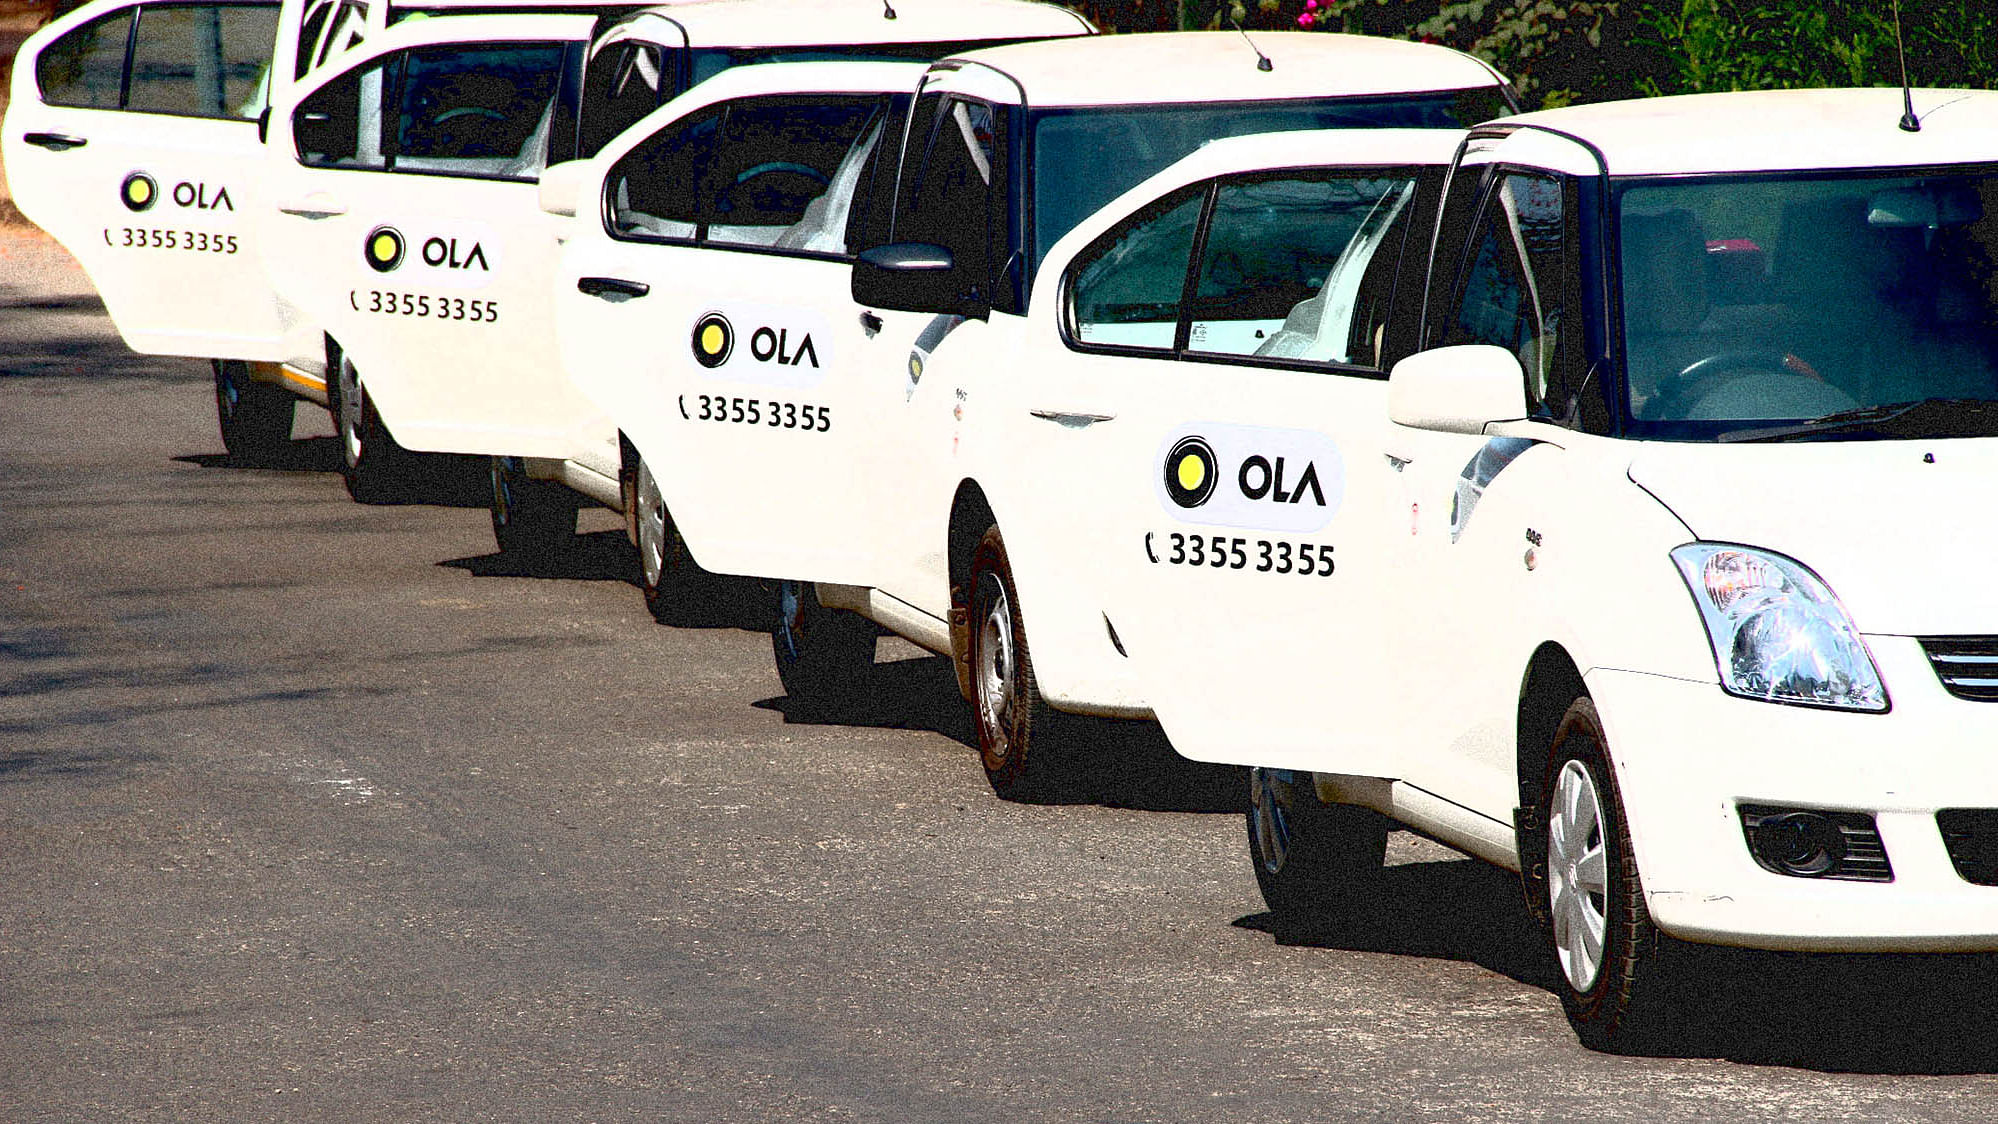 Commuters travelling from Delhi to Gurgaon had a hard time finding cabs as many drivers stayed off the roads in protest against the alleged killing of an Ola driver.&nbsp;